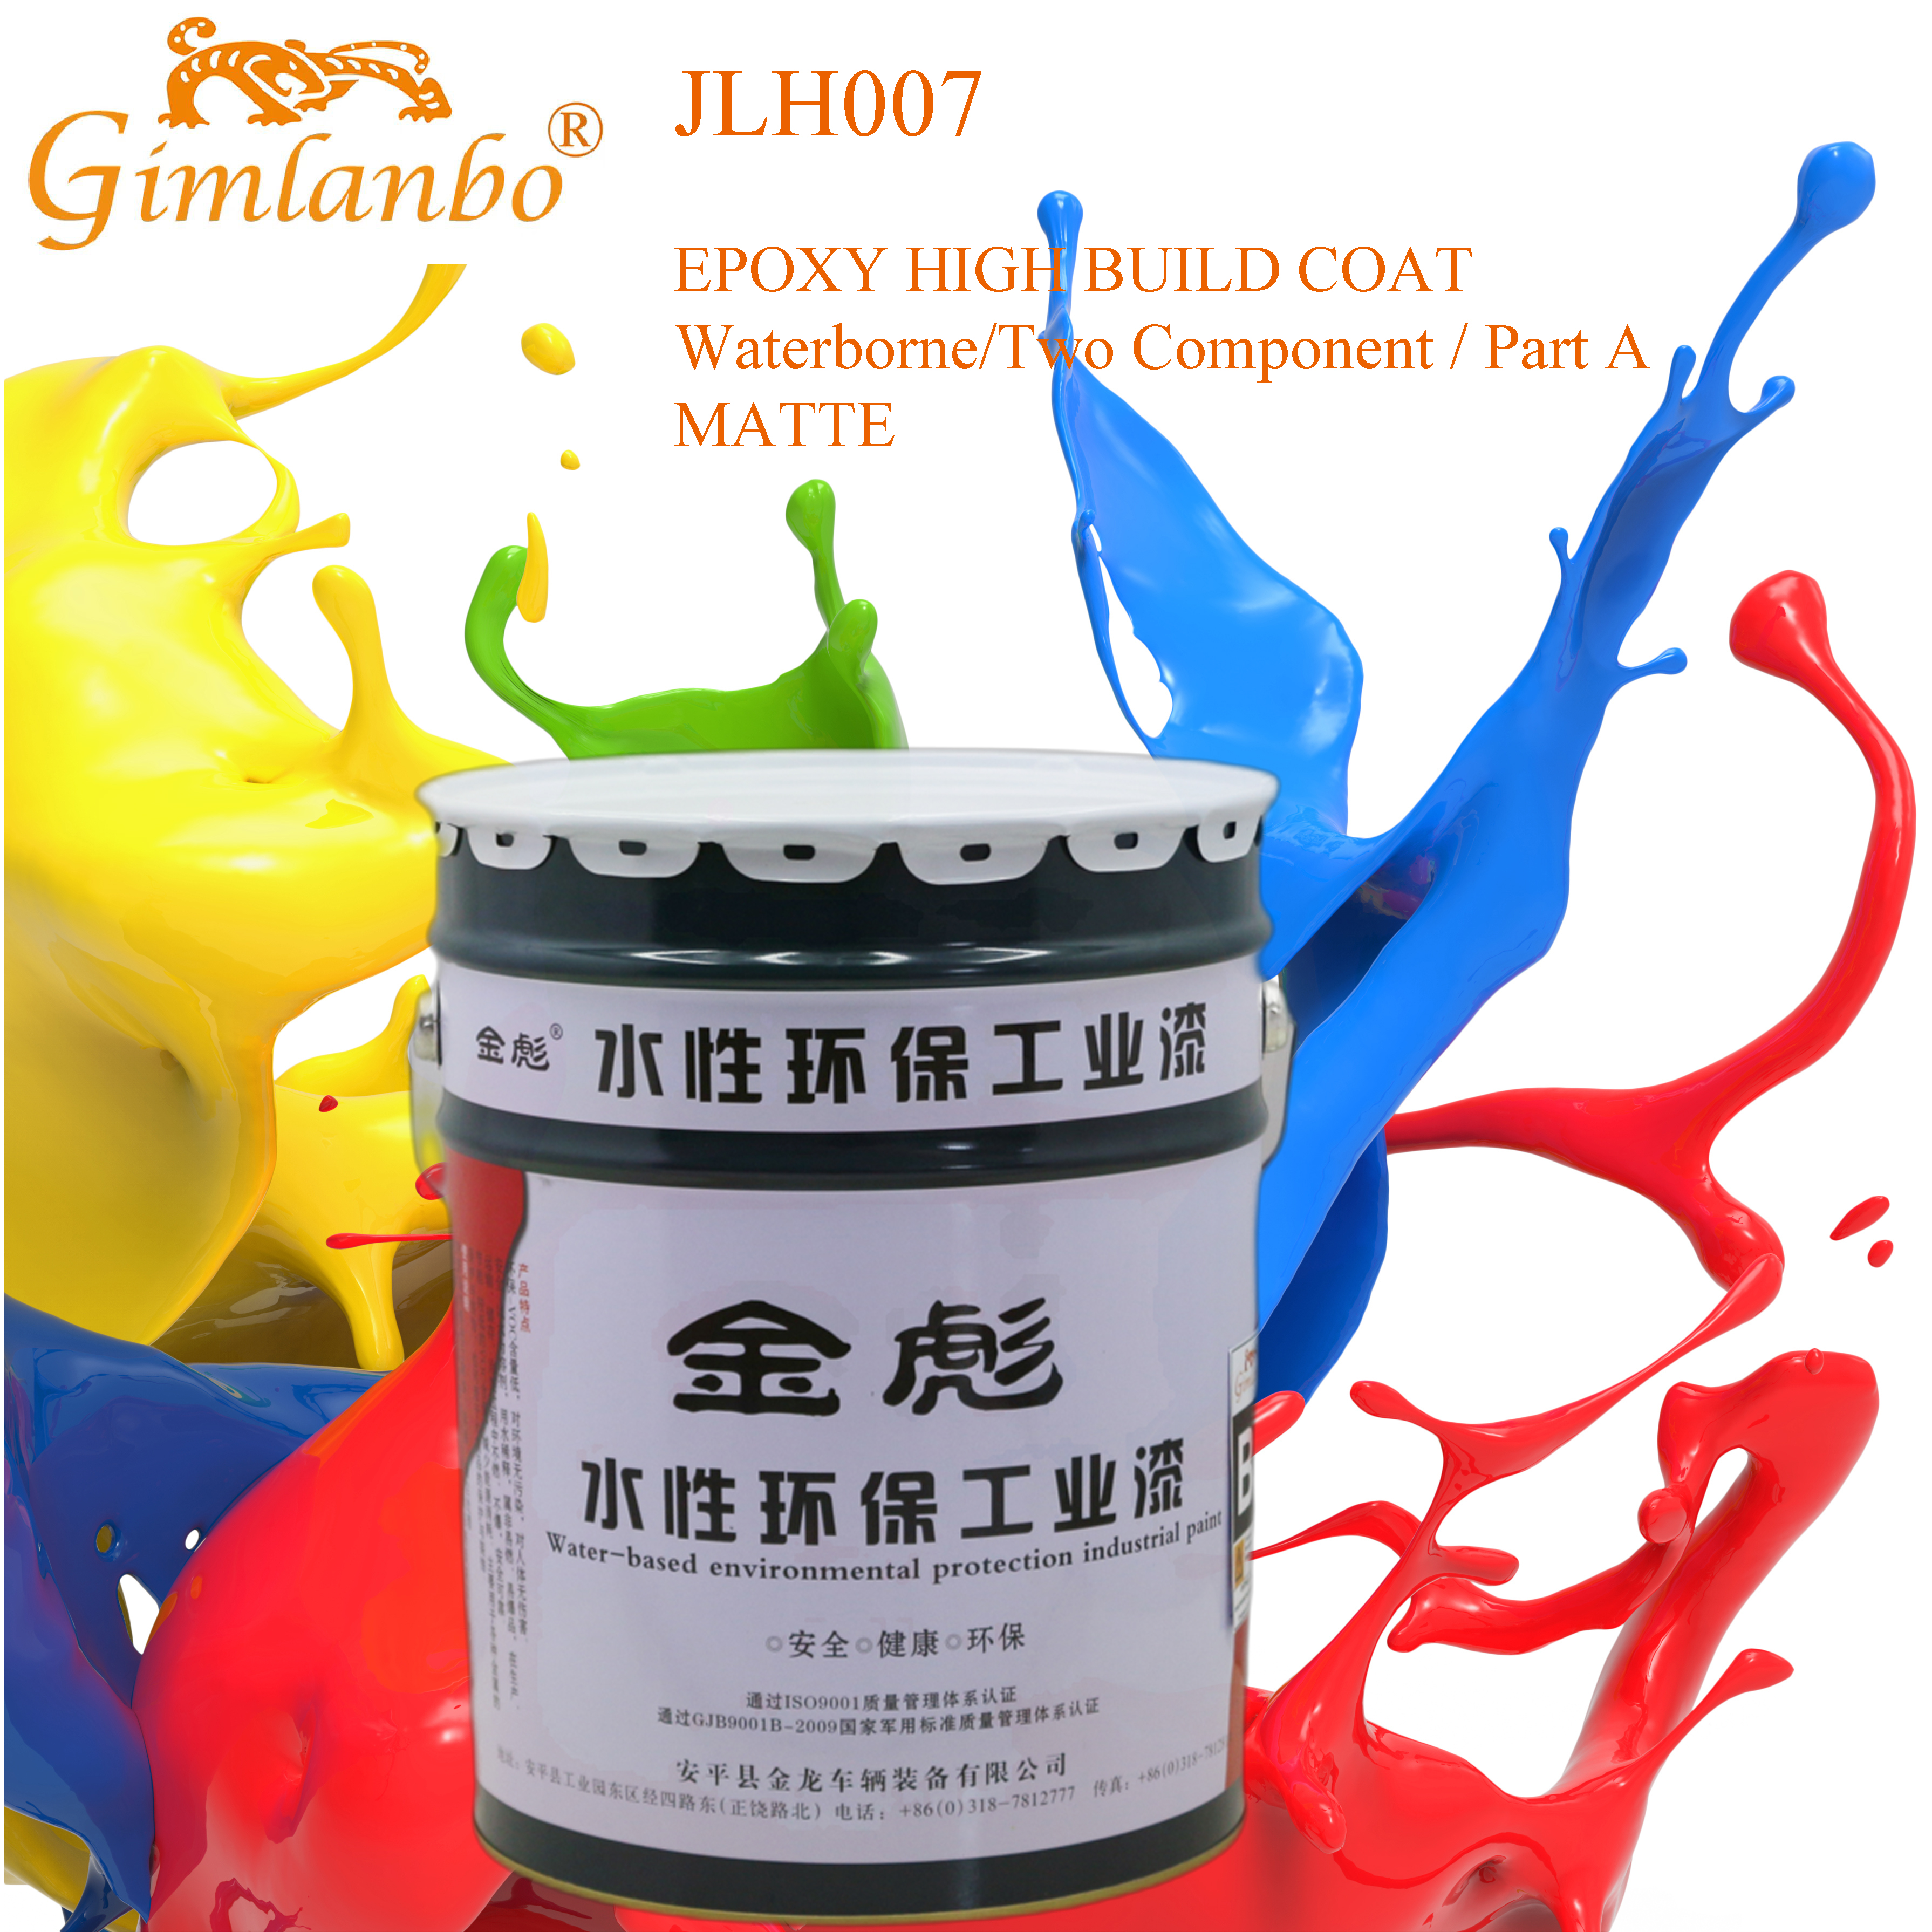 JLH007 Waterborne Two-component Epoxy High Build coat Featured Image